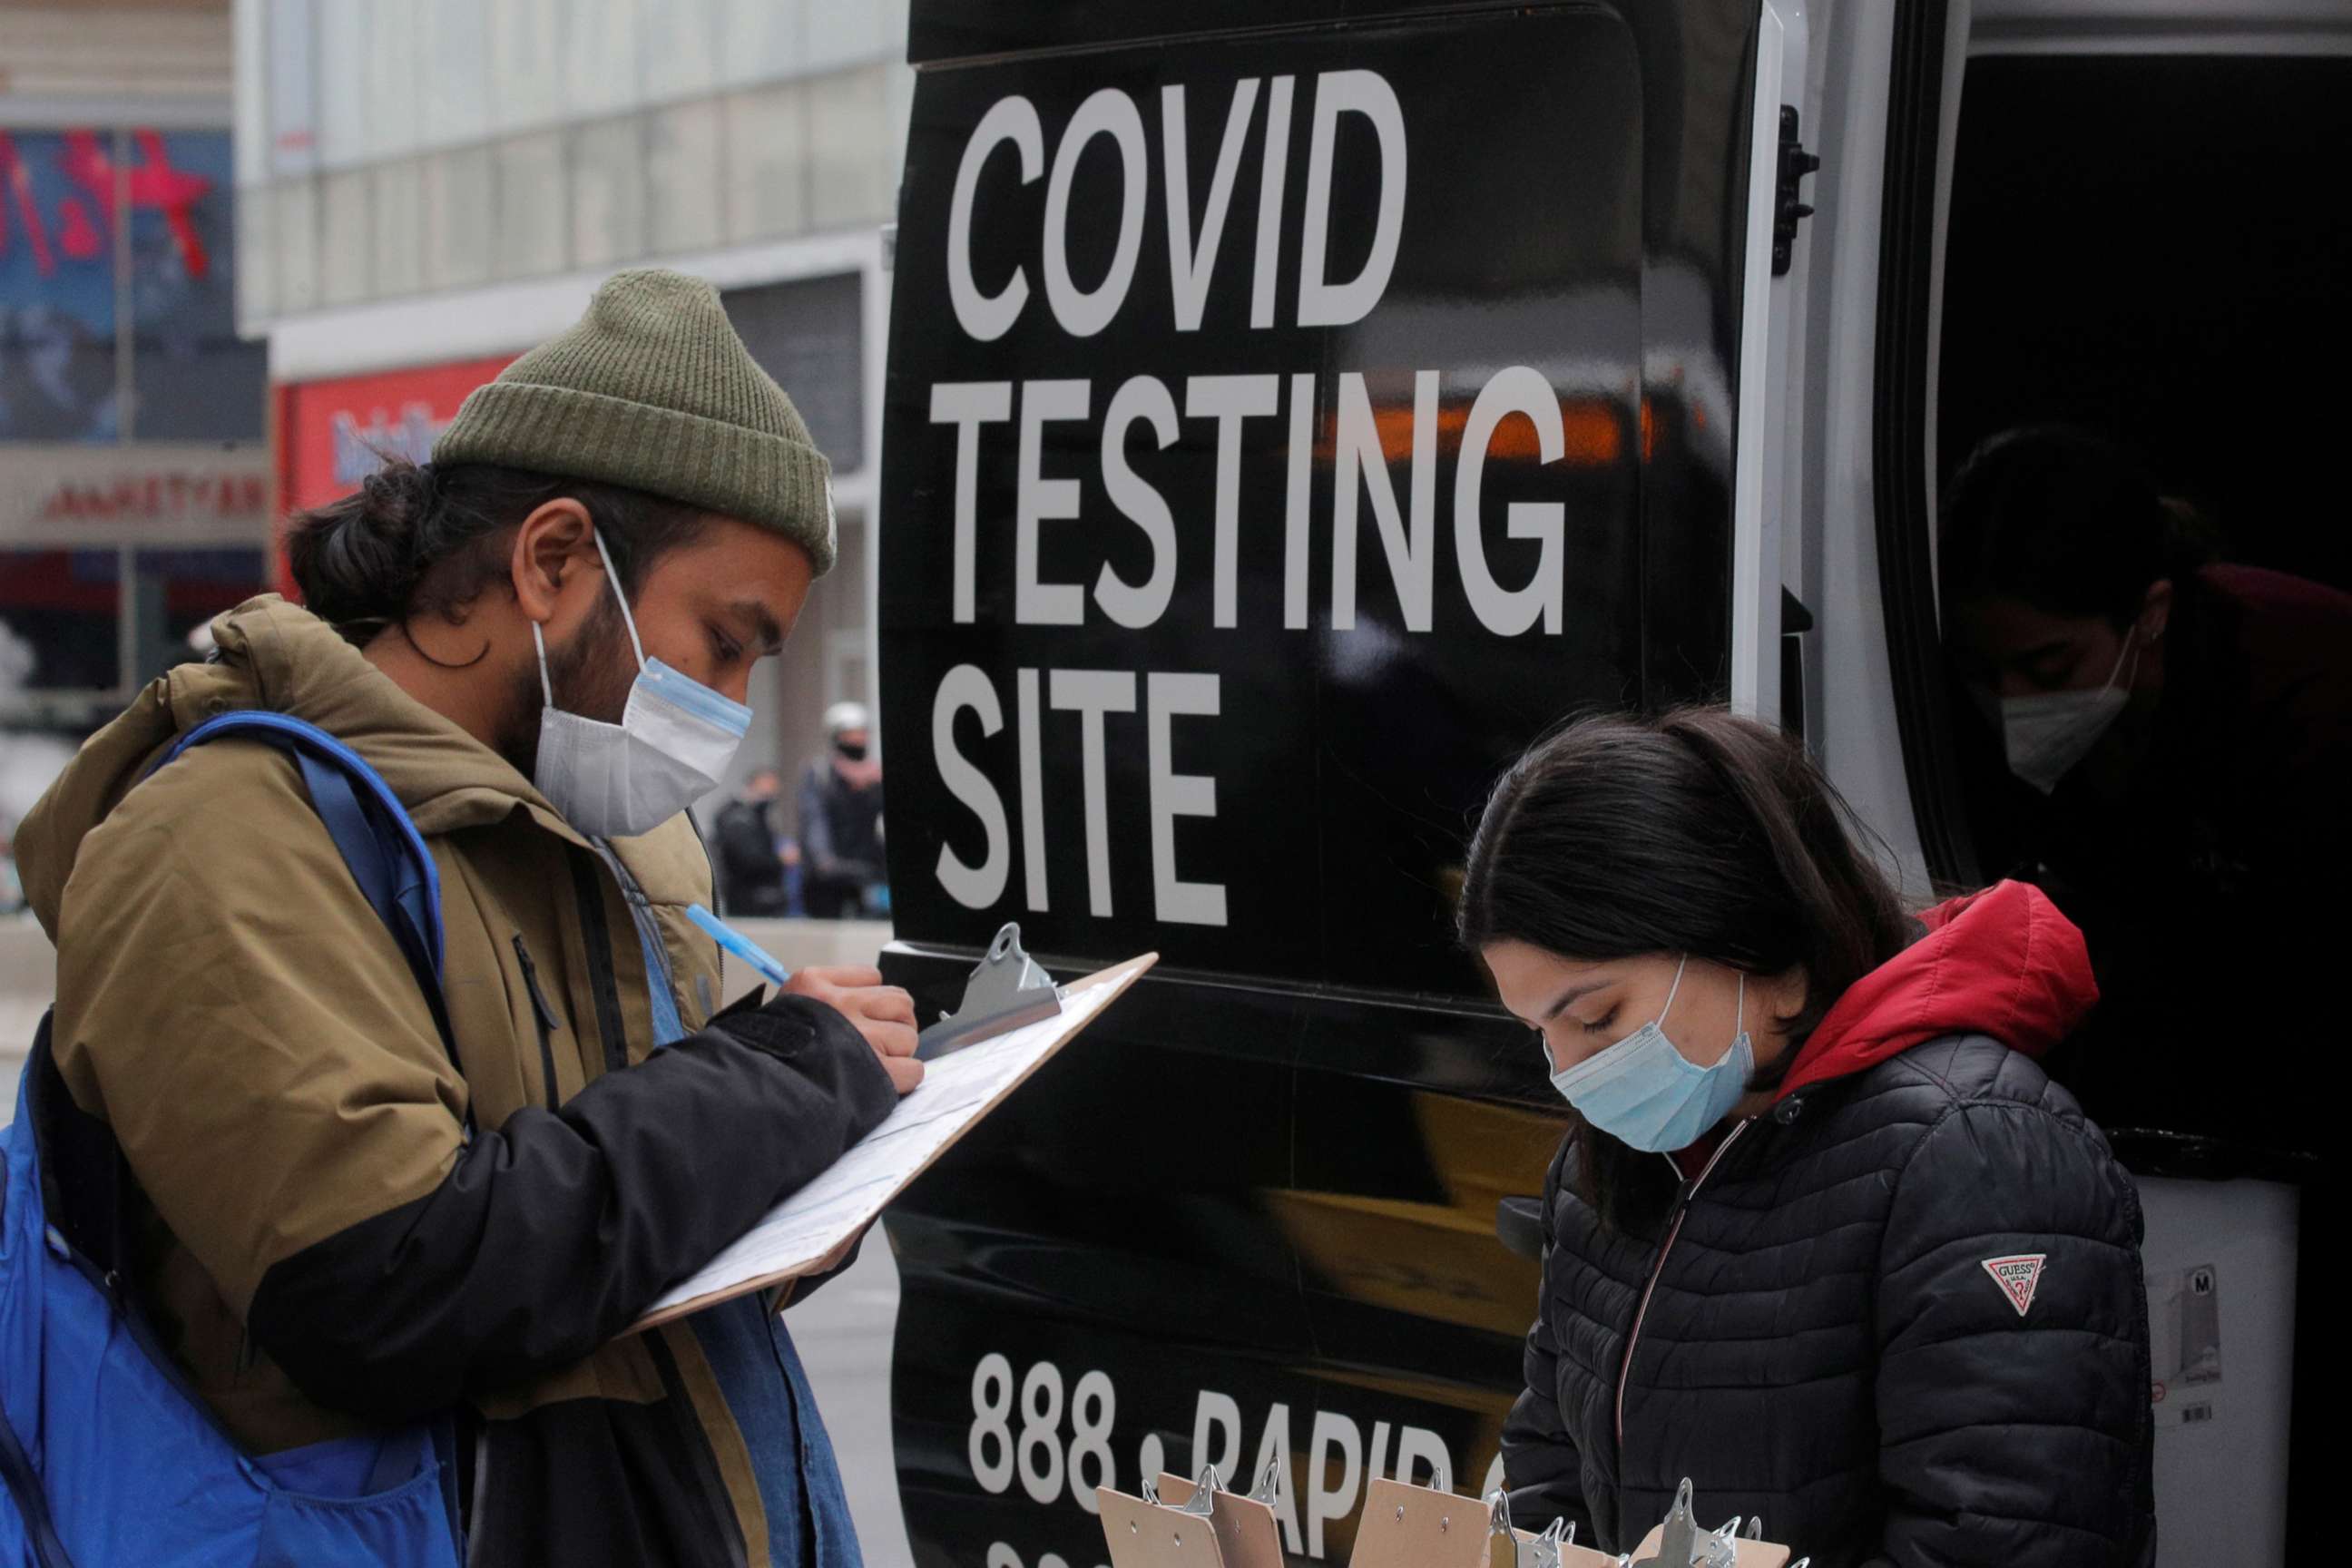 PHOTO: A man signs up to take a COVID-19 test at a mobile testing van in Herald Square in New York, March 16, 2021.